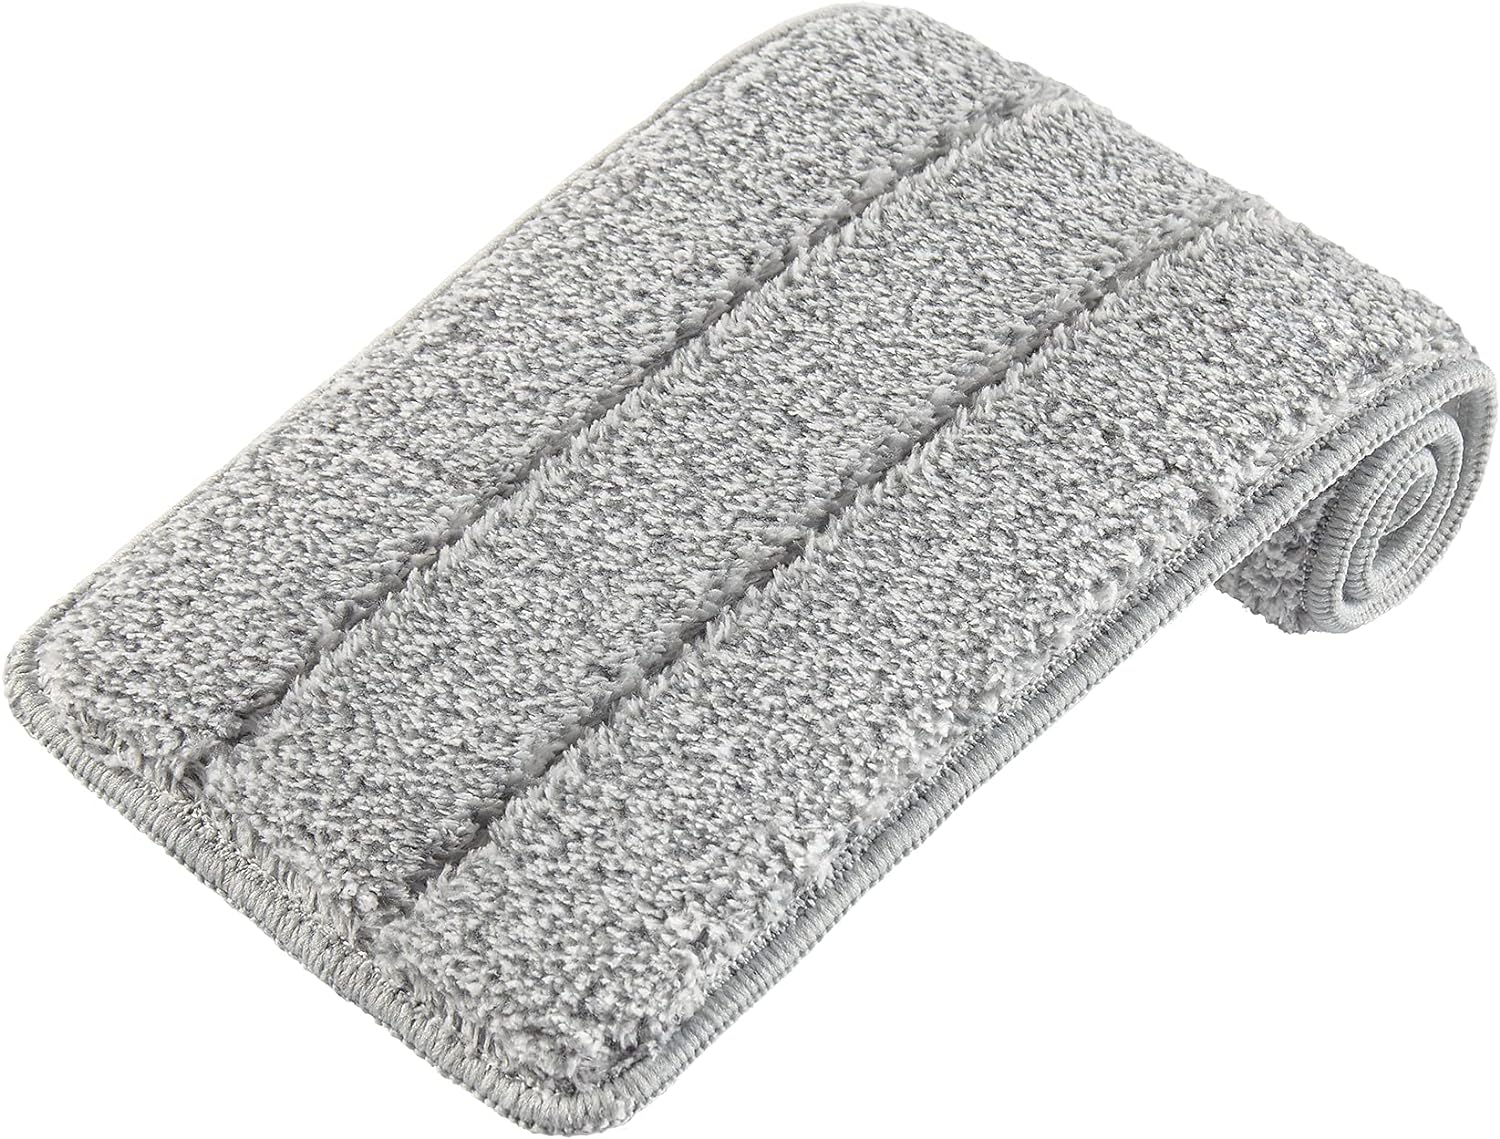 The JOYMOOP Flat Mop Pads are an absolute game-changer in my cleaning routine! These microfiber cleaning pads are not only washable and reusable but also incredibly effective at picking up dirt, dust, and grime with ease.I appreciate the thoughtful design of these pads, especially the 13-inch size which covers a large surface area, cutting down my cleaning time significantly. The grey and stripe pattern adds a touch of style to my cleaning arsenal as well.What truly sets these pads apart is thei